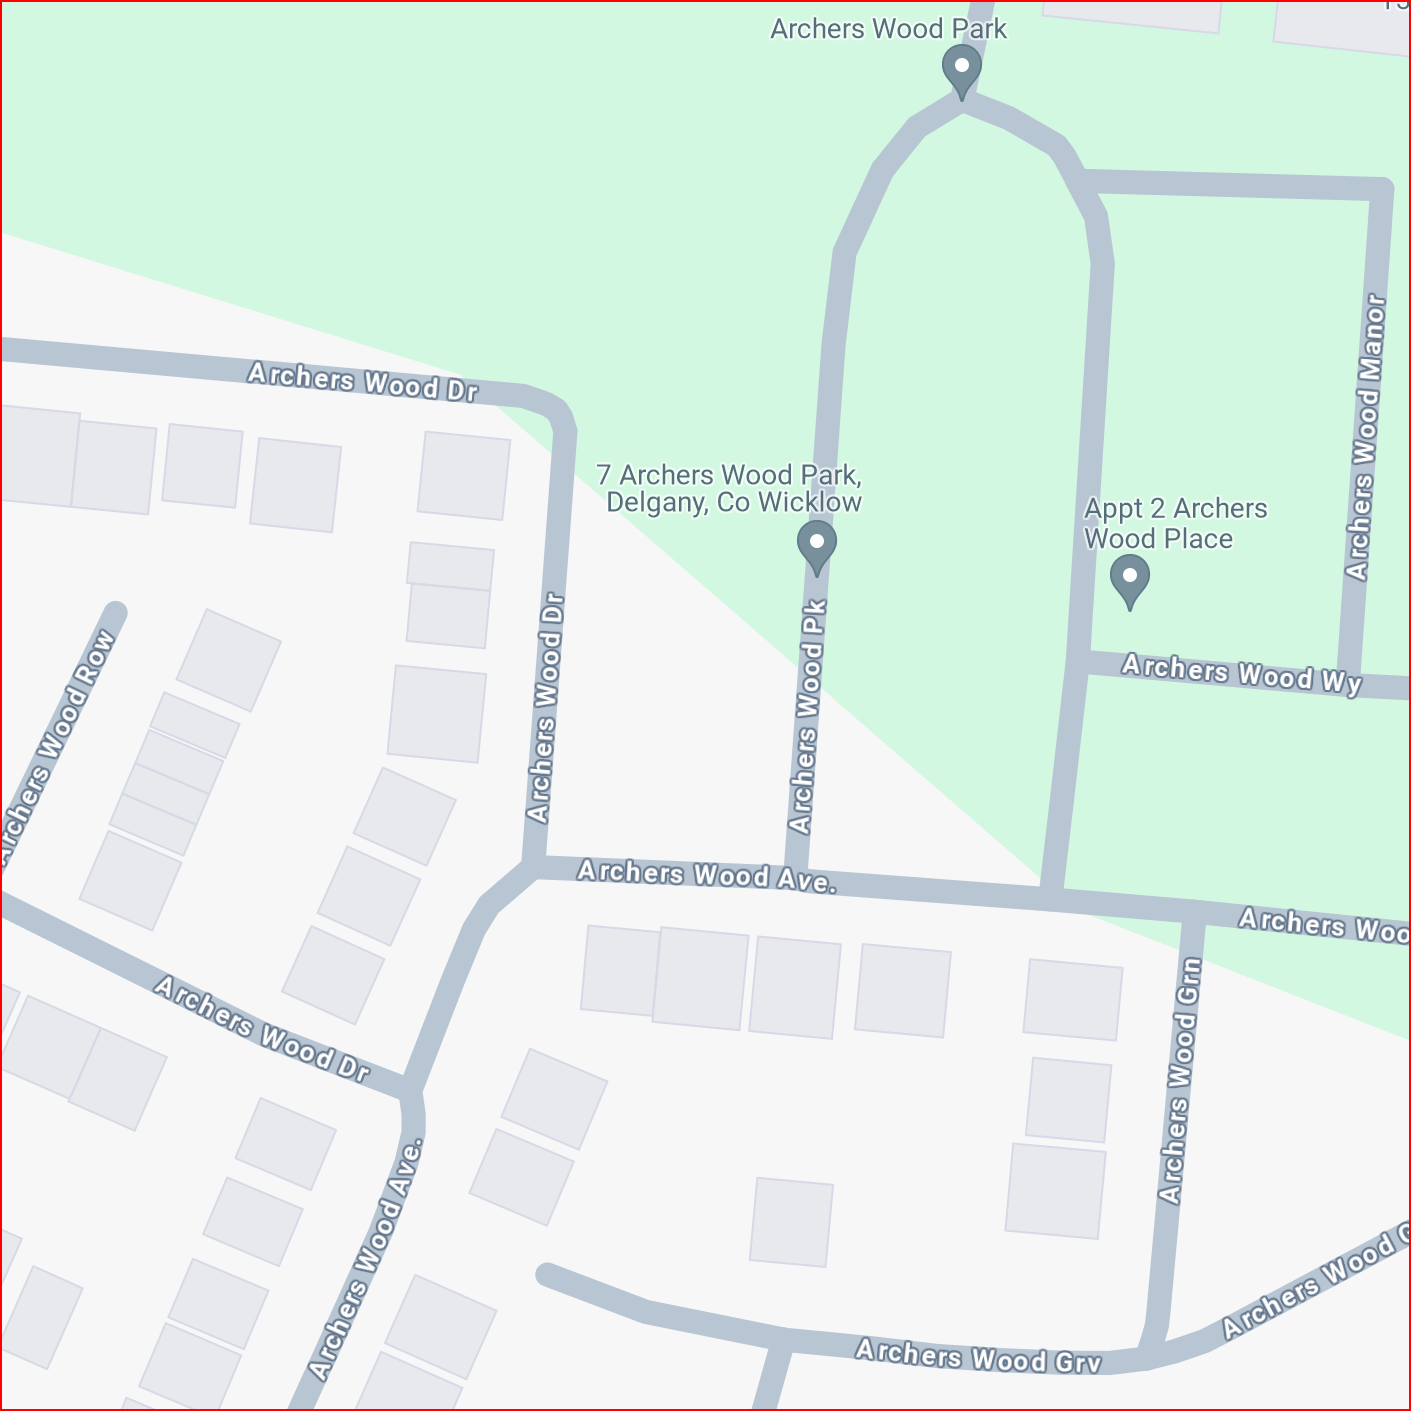 9 streets with similar names here